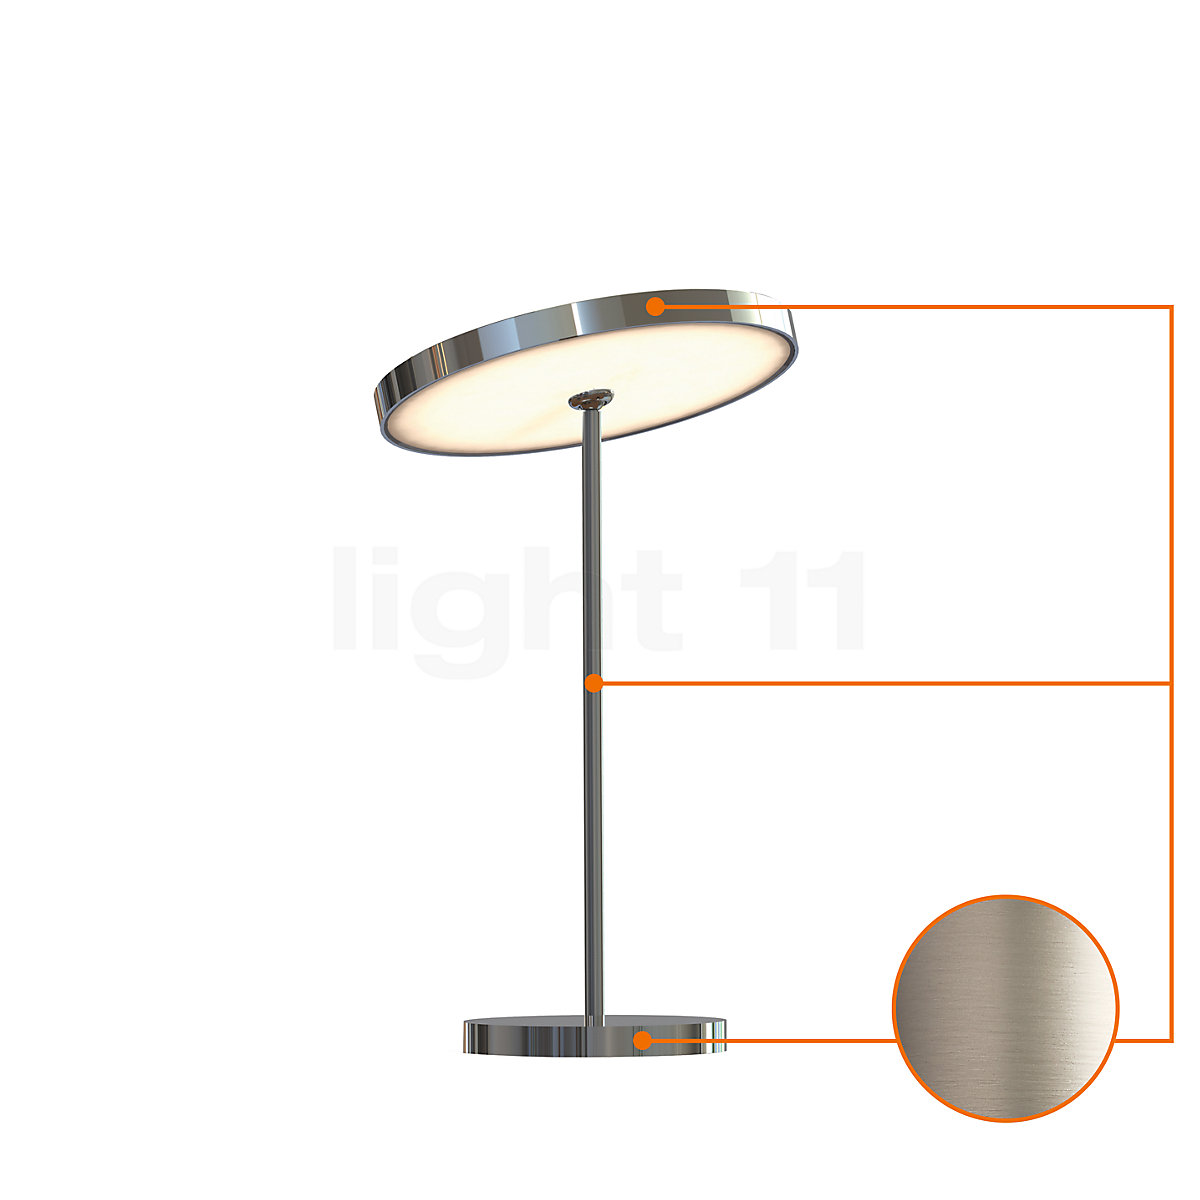 Light Sun Table Lamp ø21 Cm Small Led, Small Torchiere Table Lamps